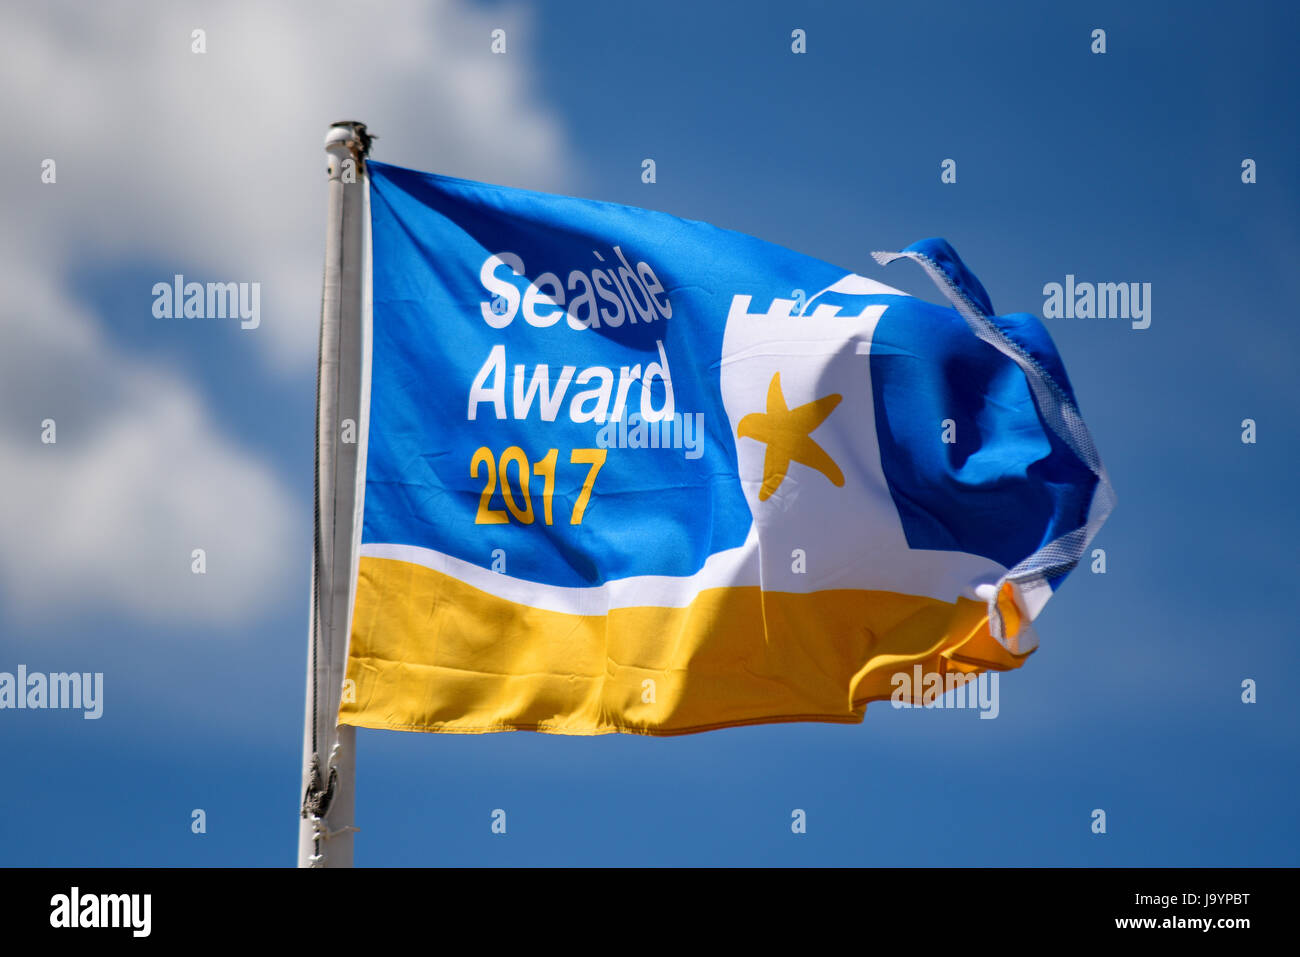 Seaside award 2017 flag for Southend on Sea, Essex, in blue sky. Formerly called the Quality Coast Award Stock Photo